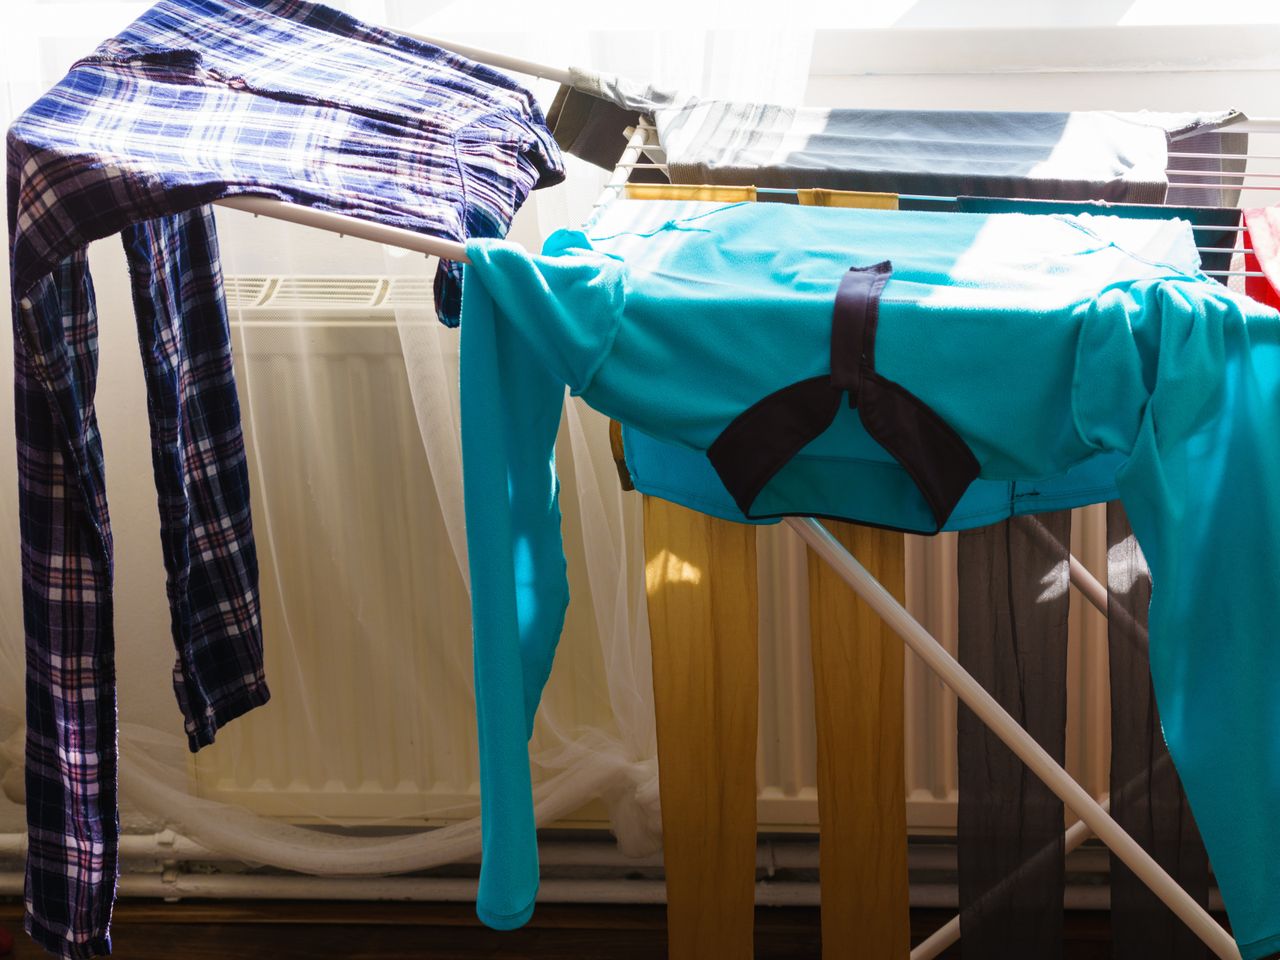 Cut laundry drying time with this trick: skip the tumble dryer, grab a sheet